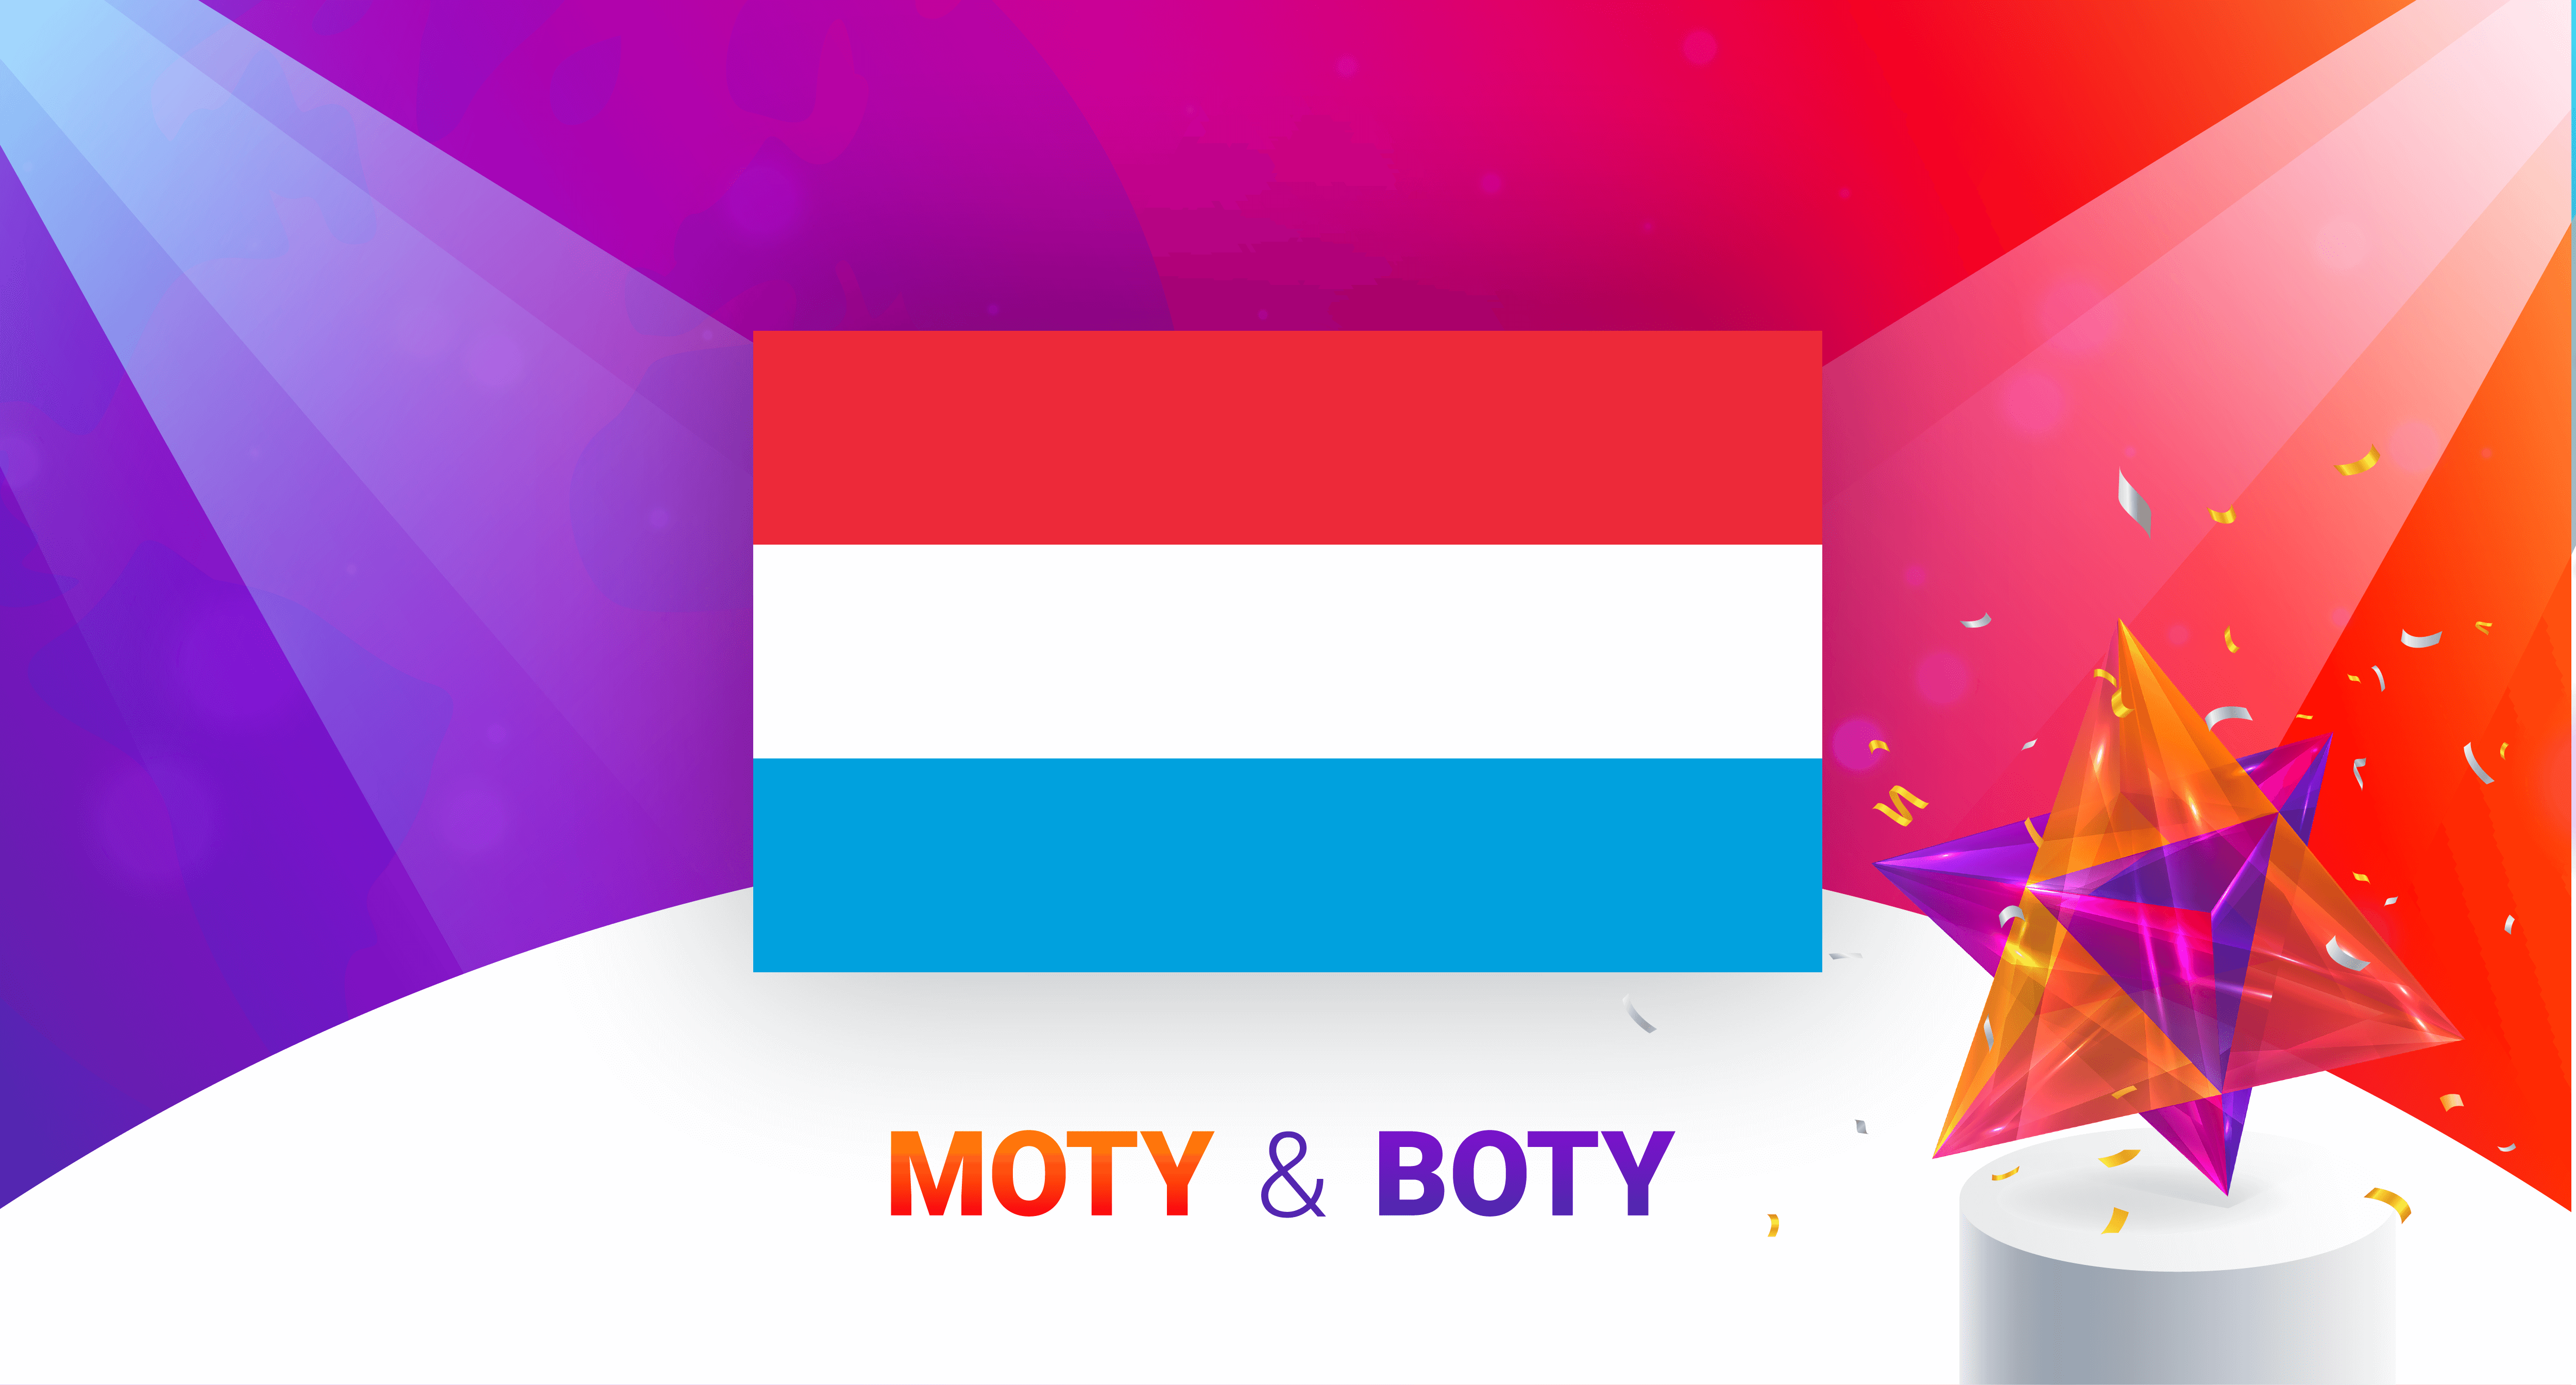 Top Marketers & Top Brands in Luxembourg - MOTY & BOTY Luxembourg